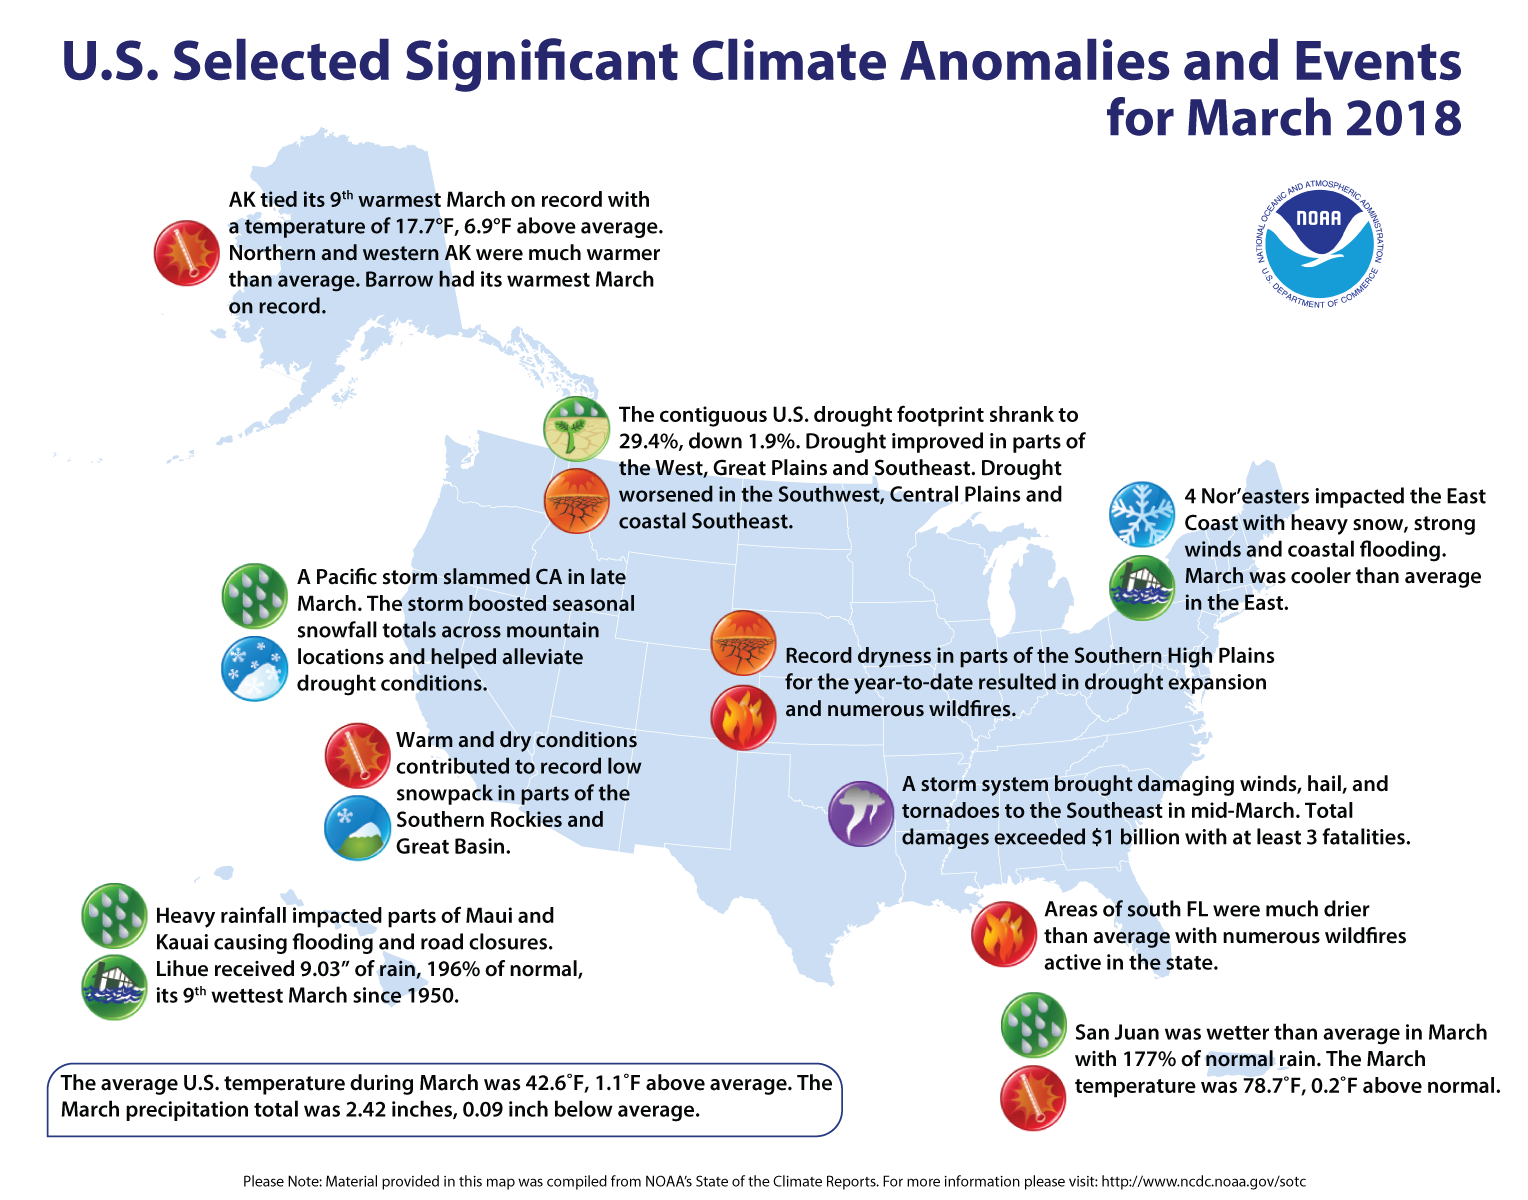 An annotated map of the United States showing notable climate events that occurred during March and the first quarter of 2018. For details, see the bulleted list below in our story and visit https://www.ncei.noaa.gov/news/national-climate-201803.